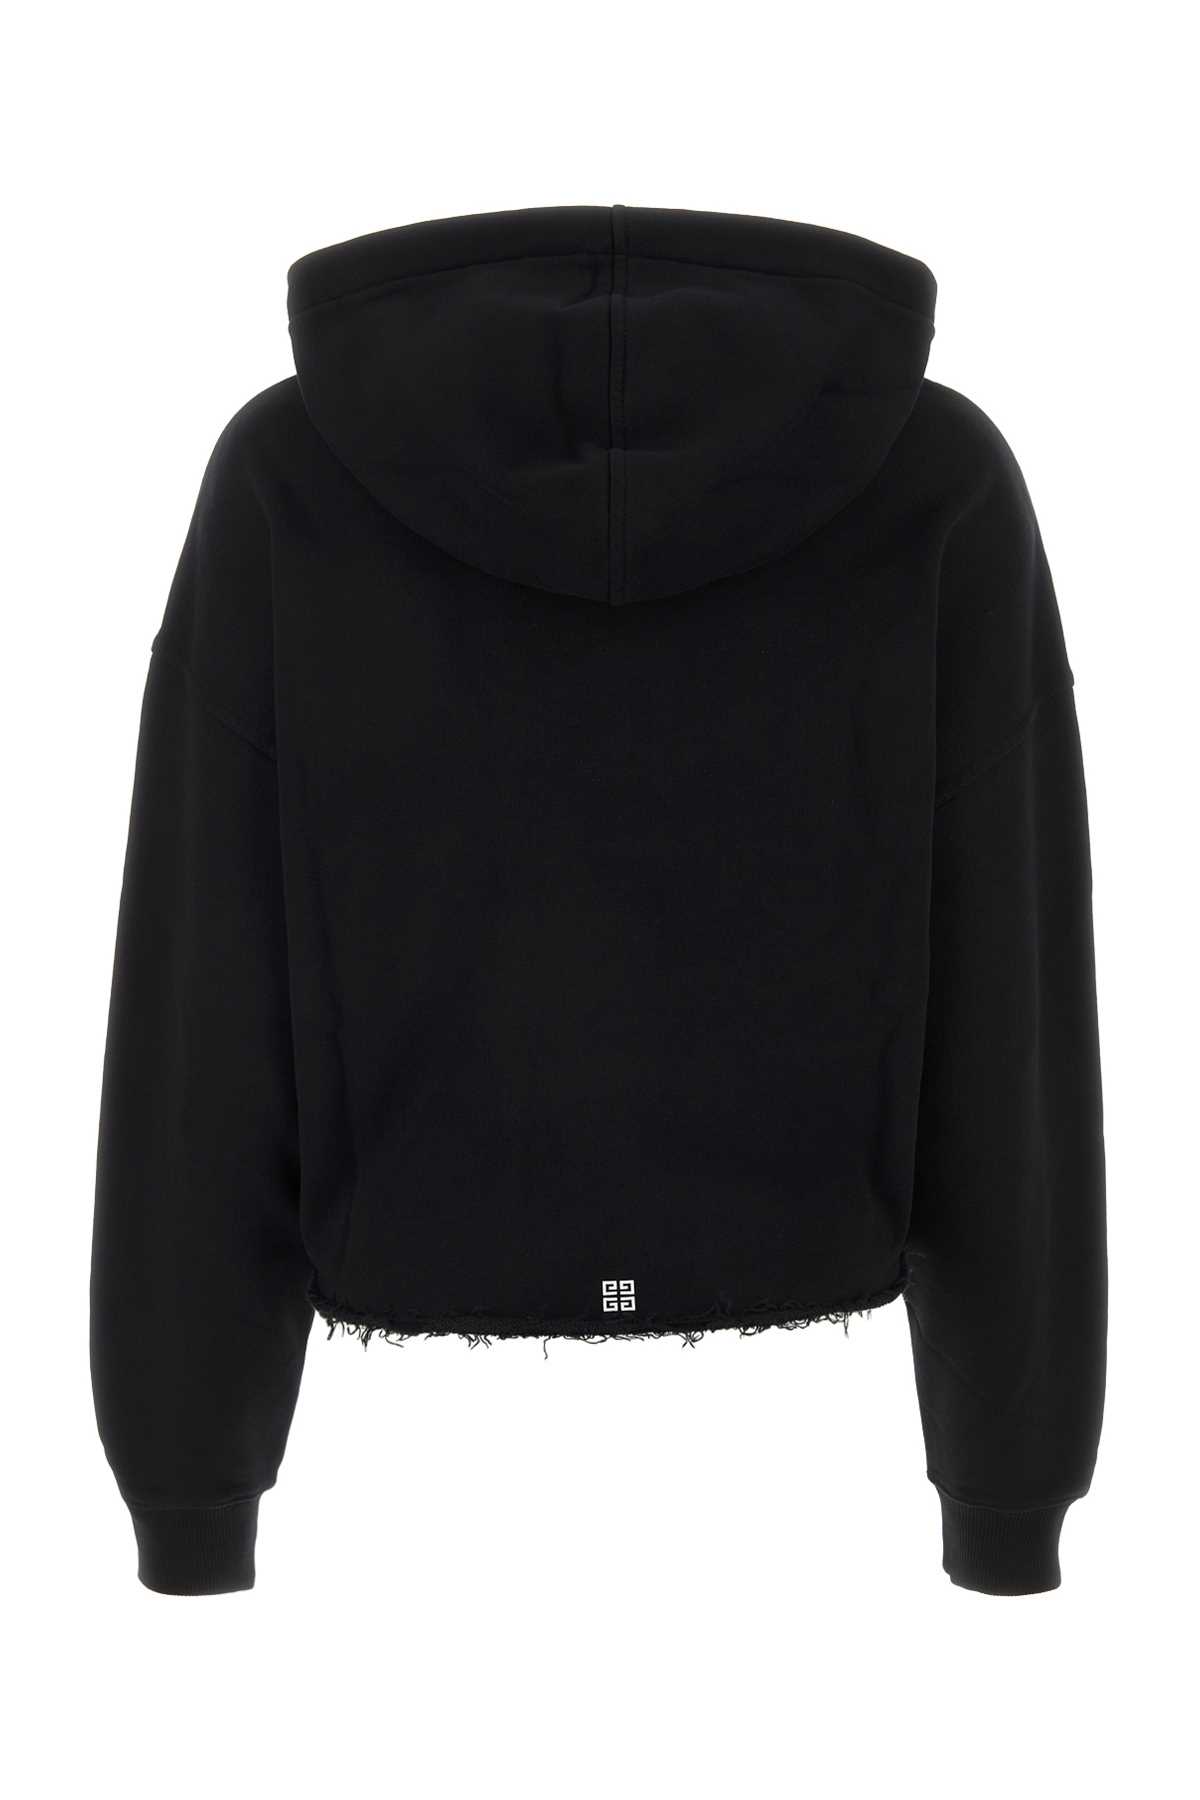 Givenchy Black Cotton Sweatshirt In 001